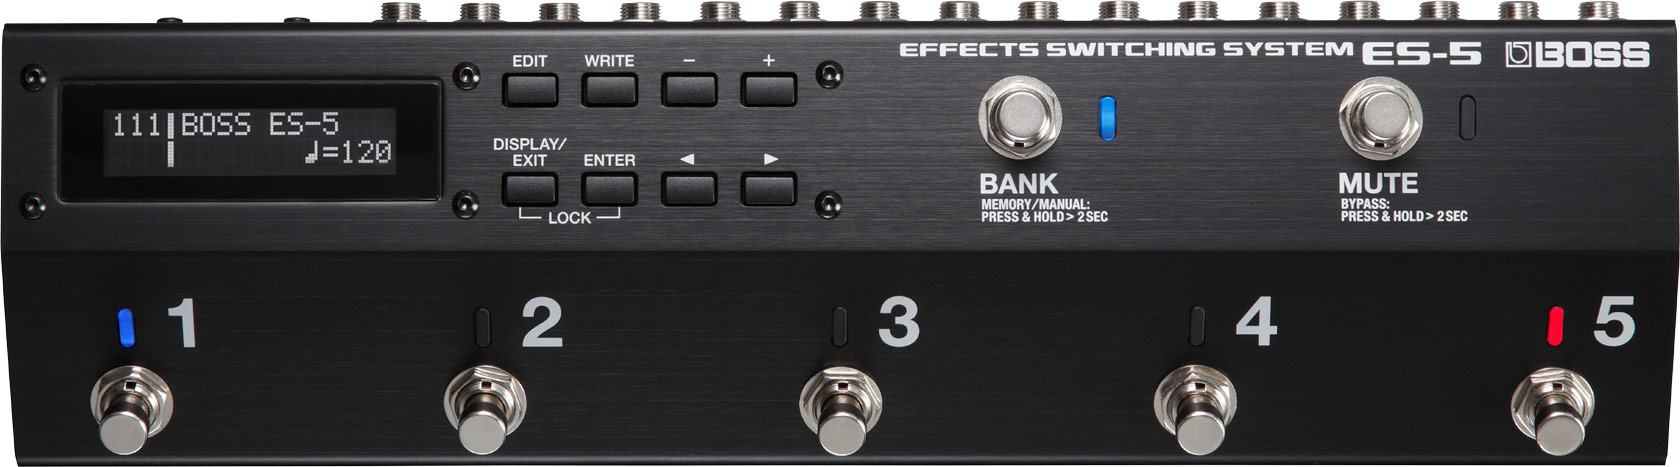 BOSS / ES-5 Effects Switching System 5ループスイッチャー